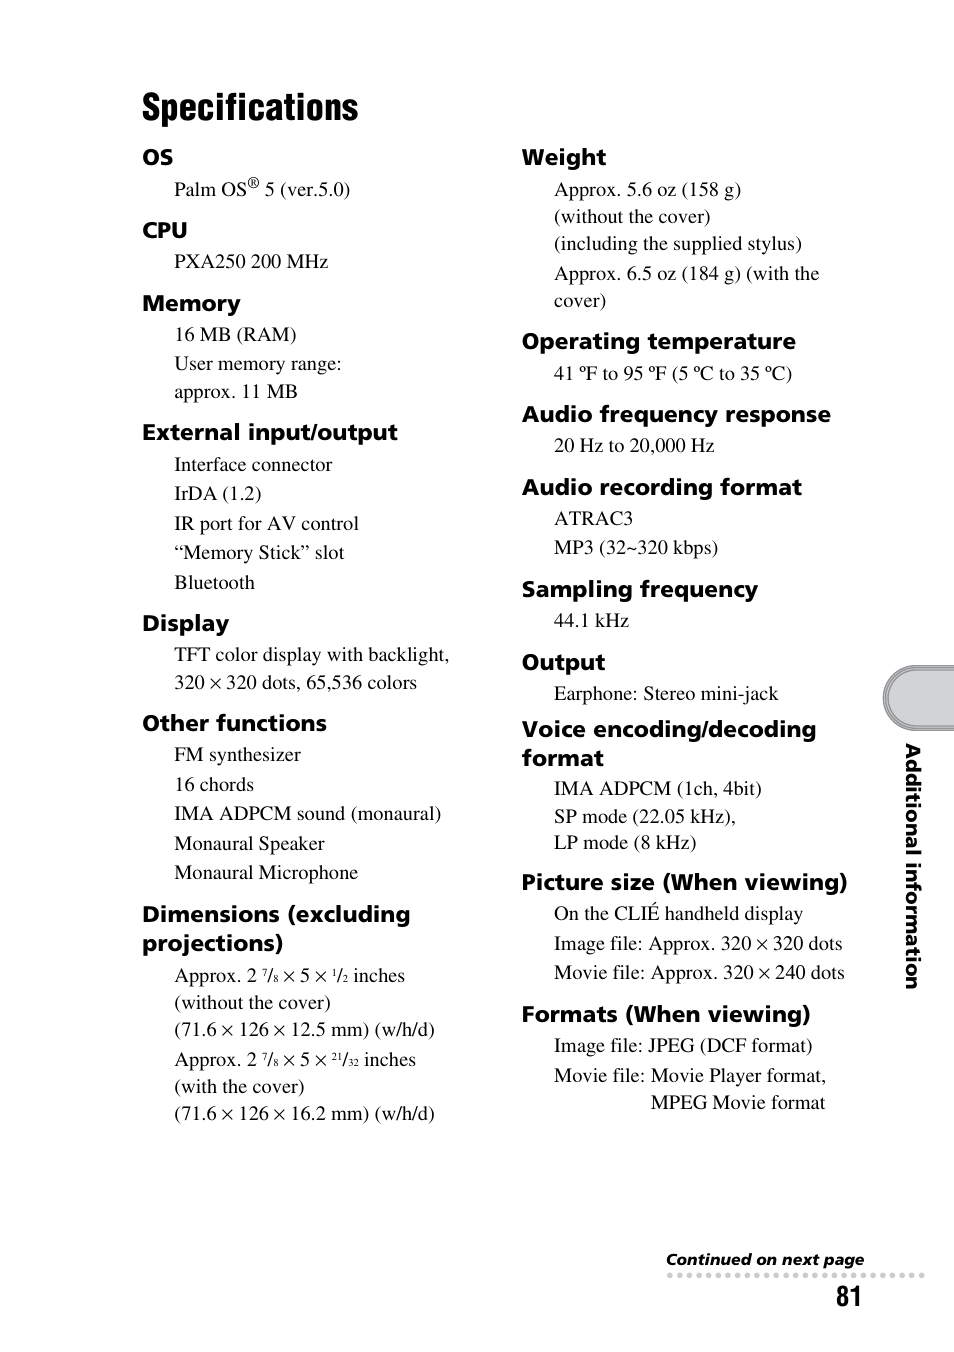 Specifications | Sony PEG-TG50 User Manual | Page 81 / 100